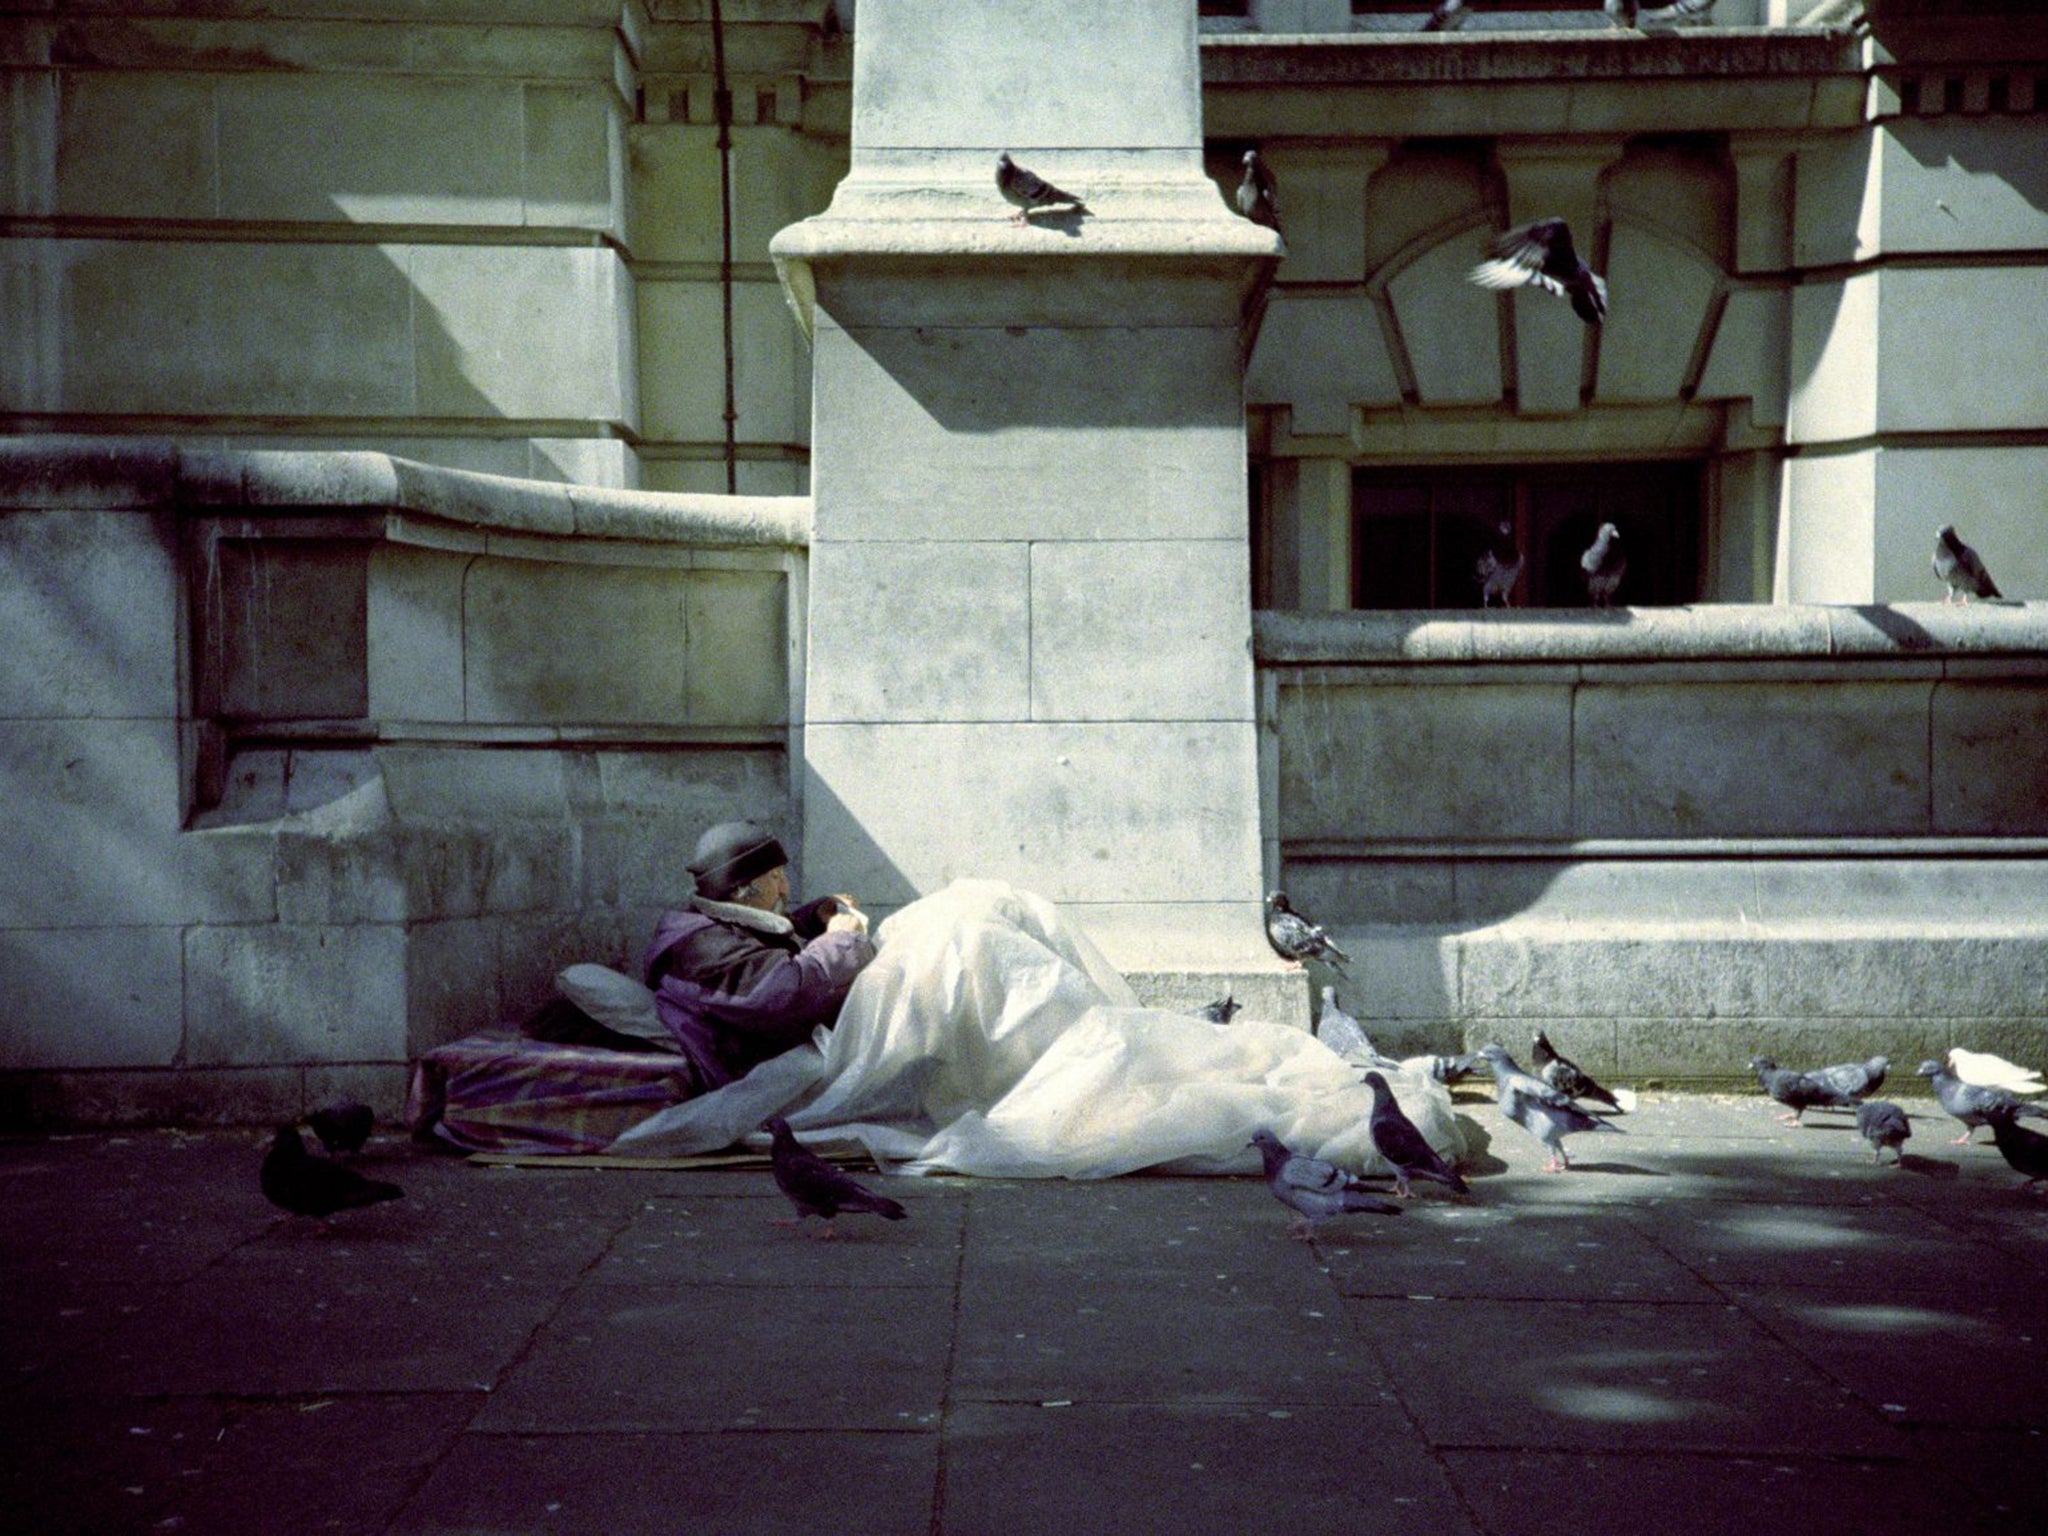 Homeless and sleeping rough? You could now end up in court and be fined £1,000